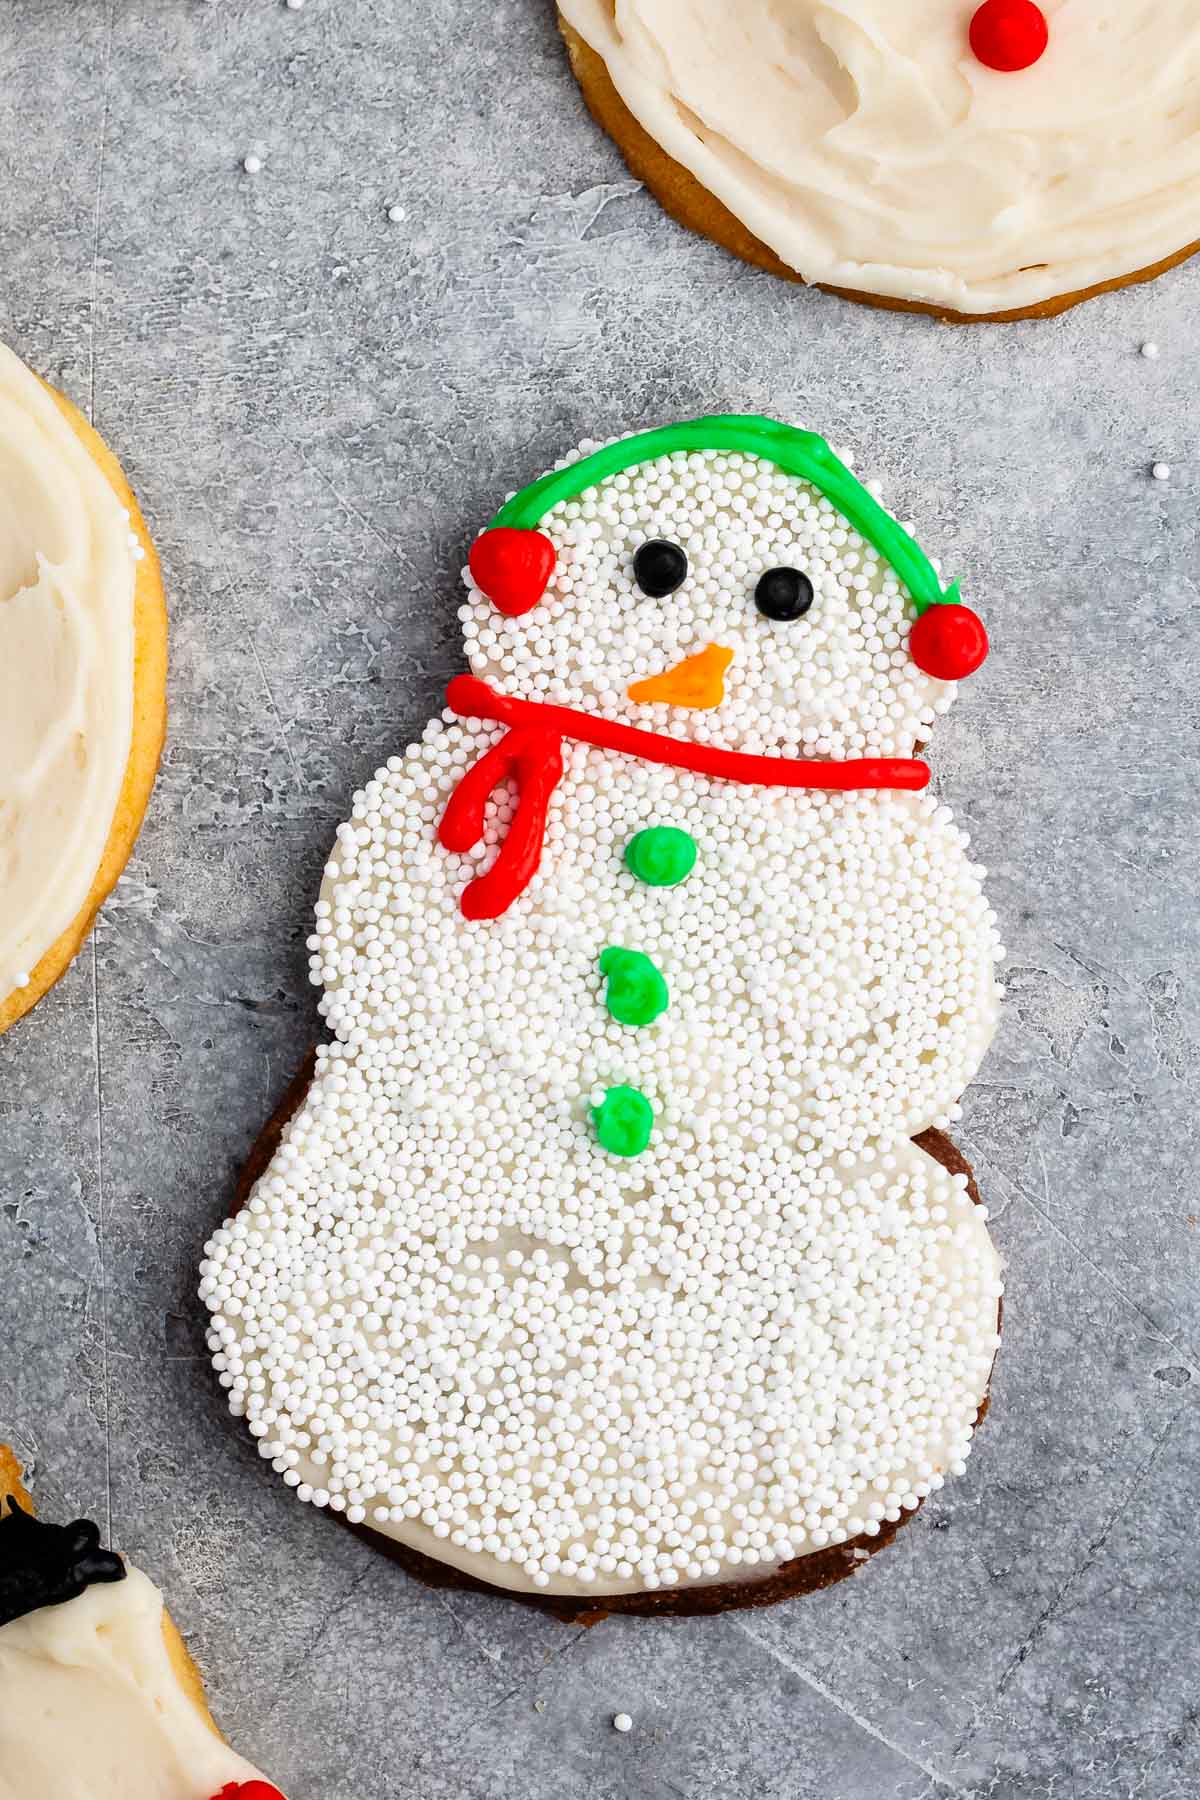 snowman cookies covered in white frosting and sprinkles and icing to replicate a snowman.